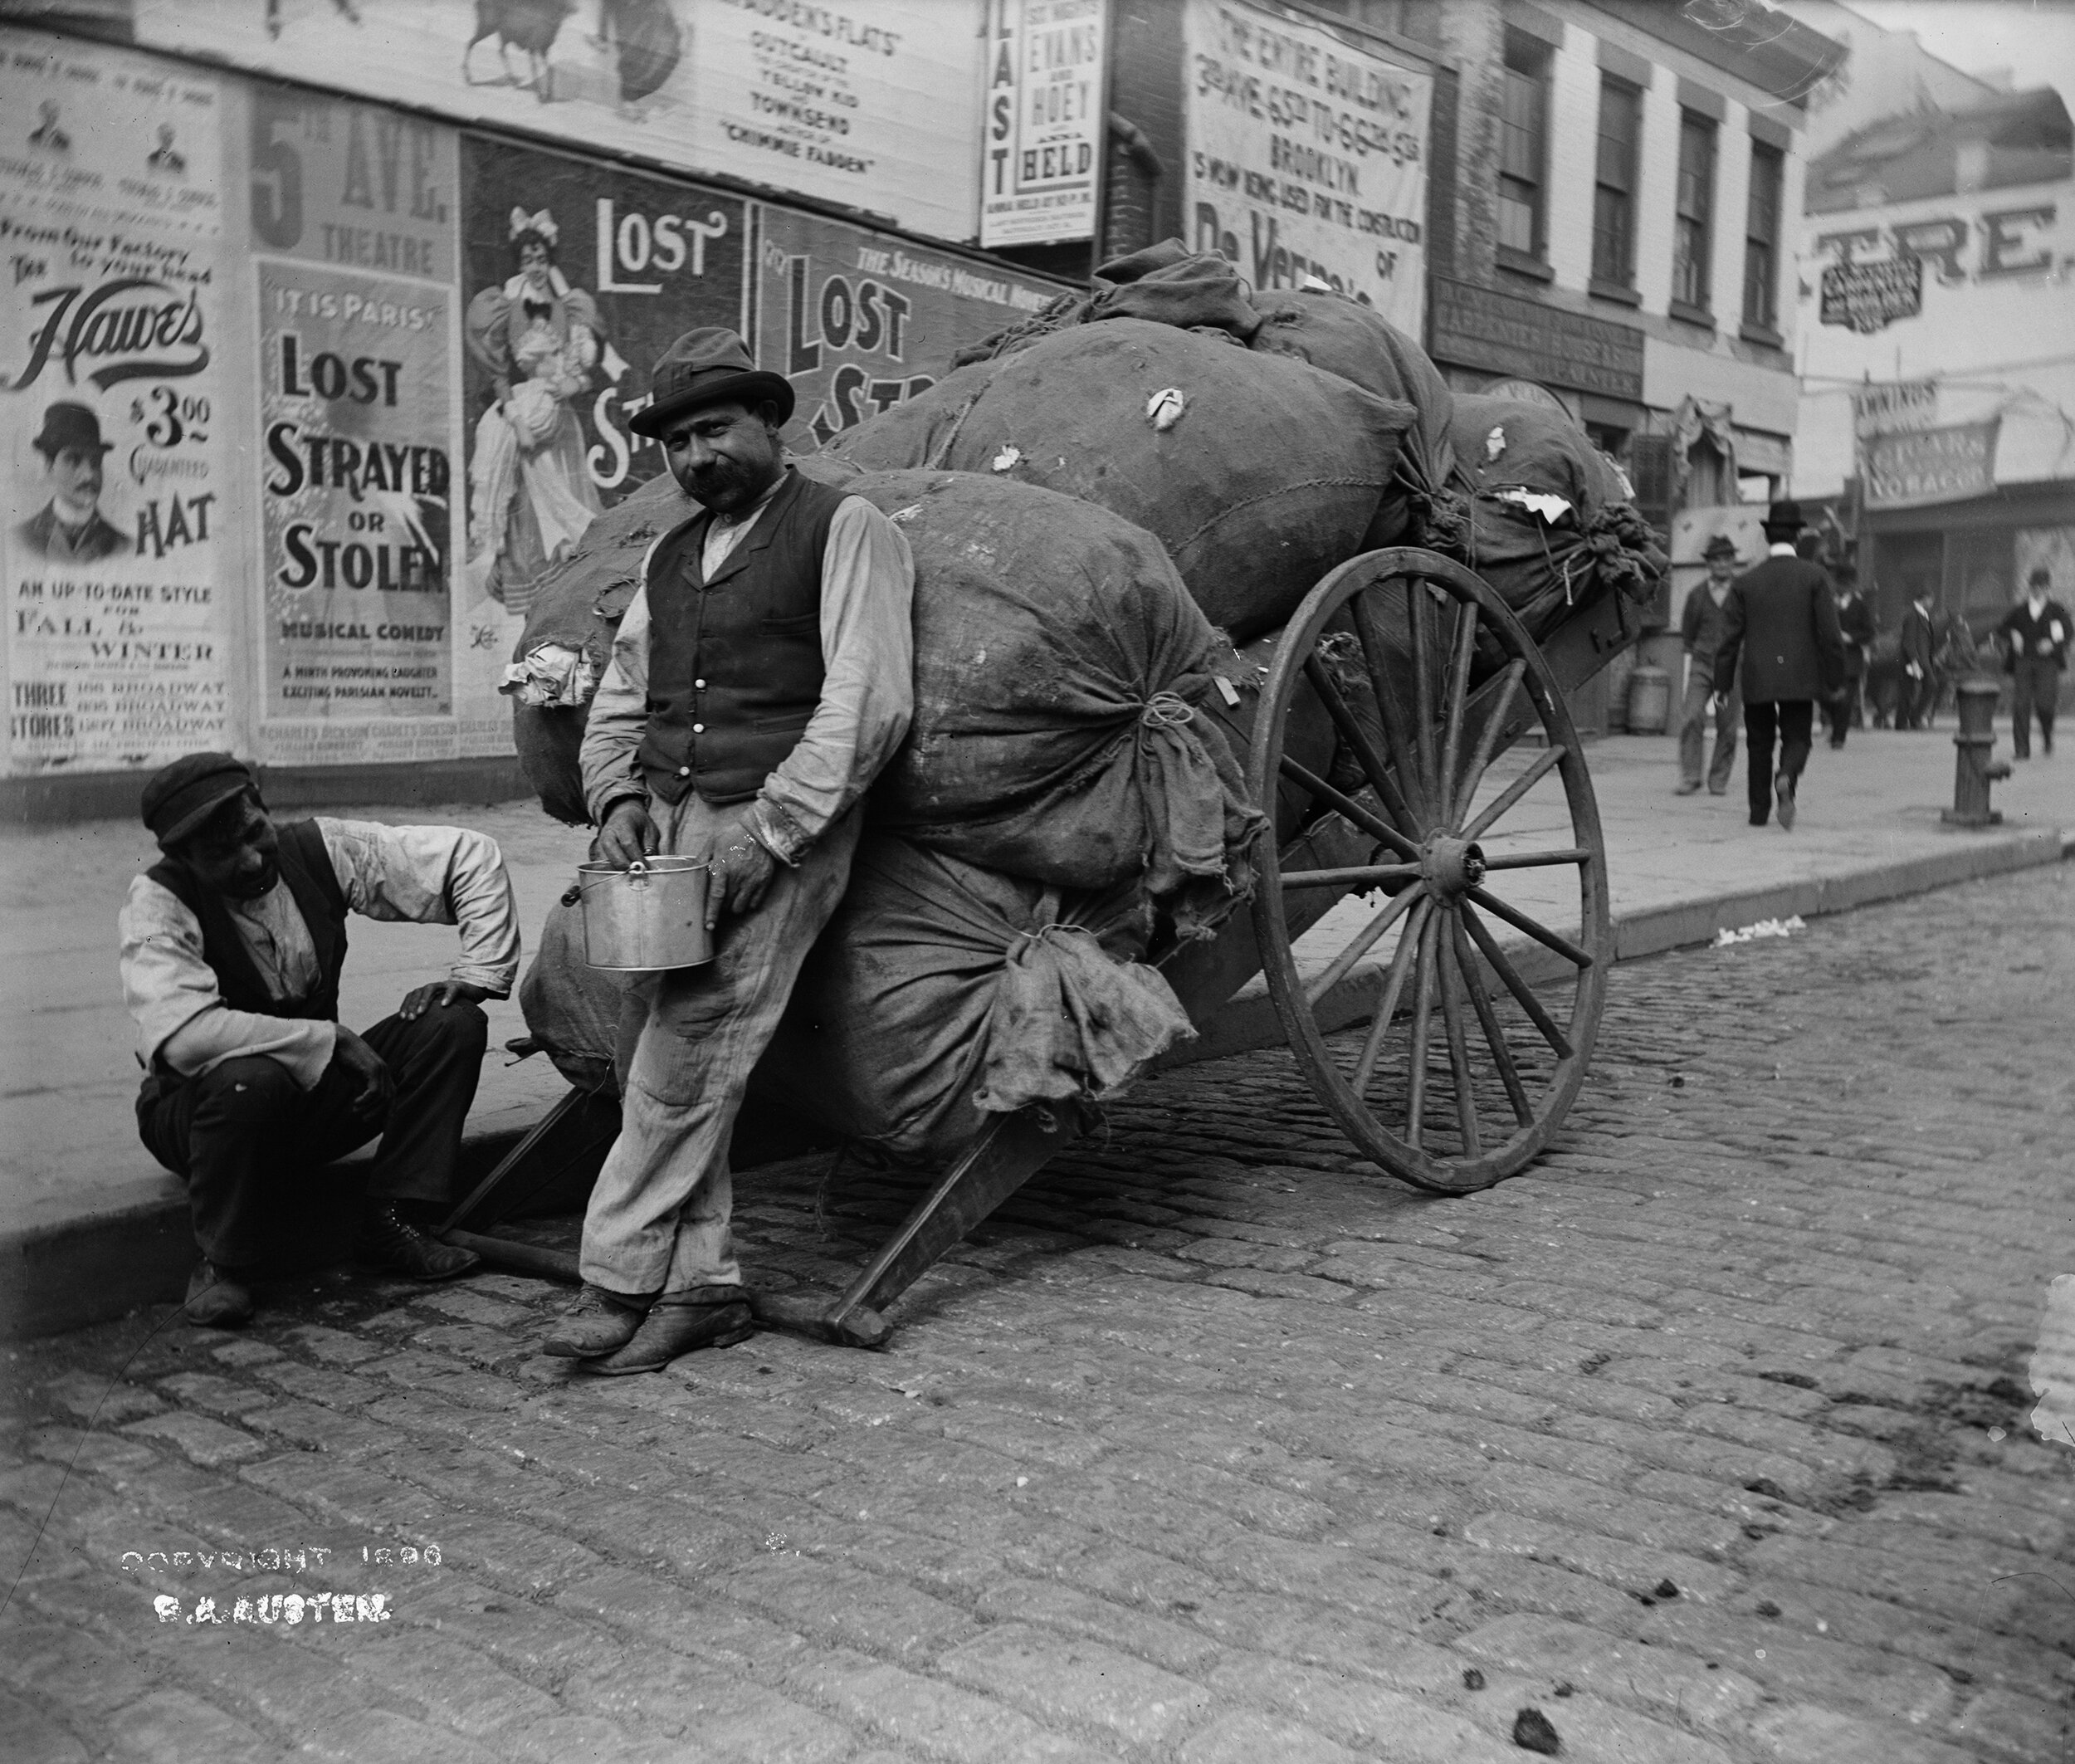   Ragmen and Cart, Twenty-third Street between Third and Lexington Avenues  Collection of Historic Richmond Town, 50.015.5968 